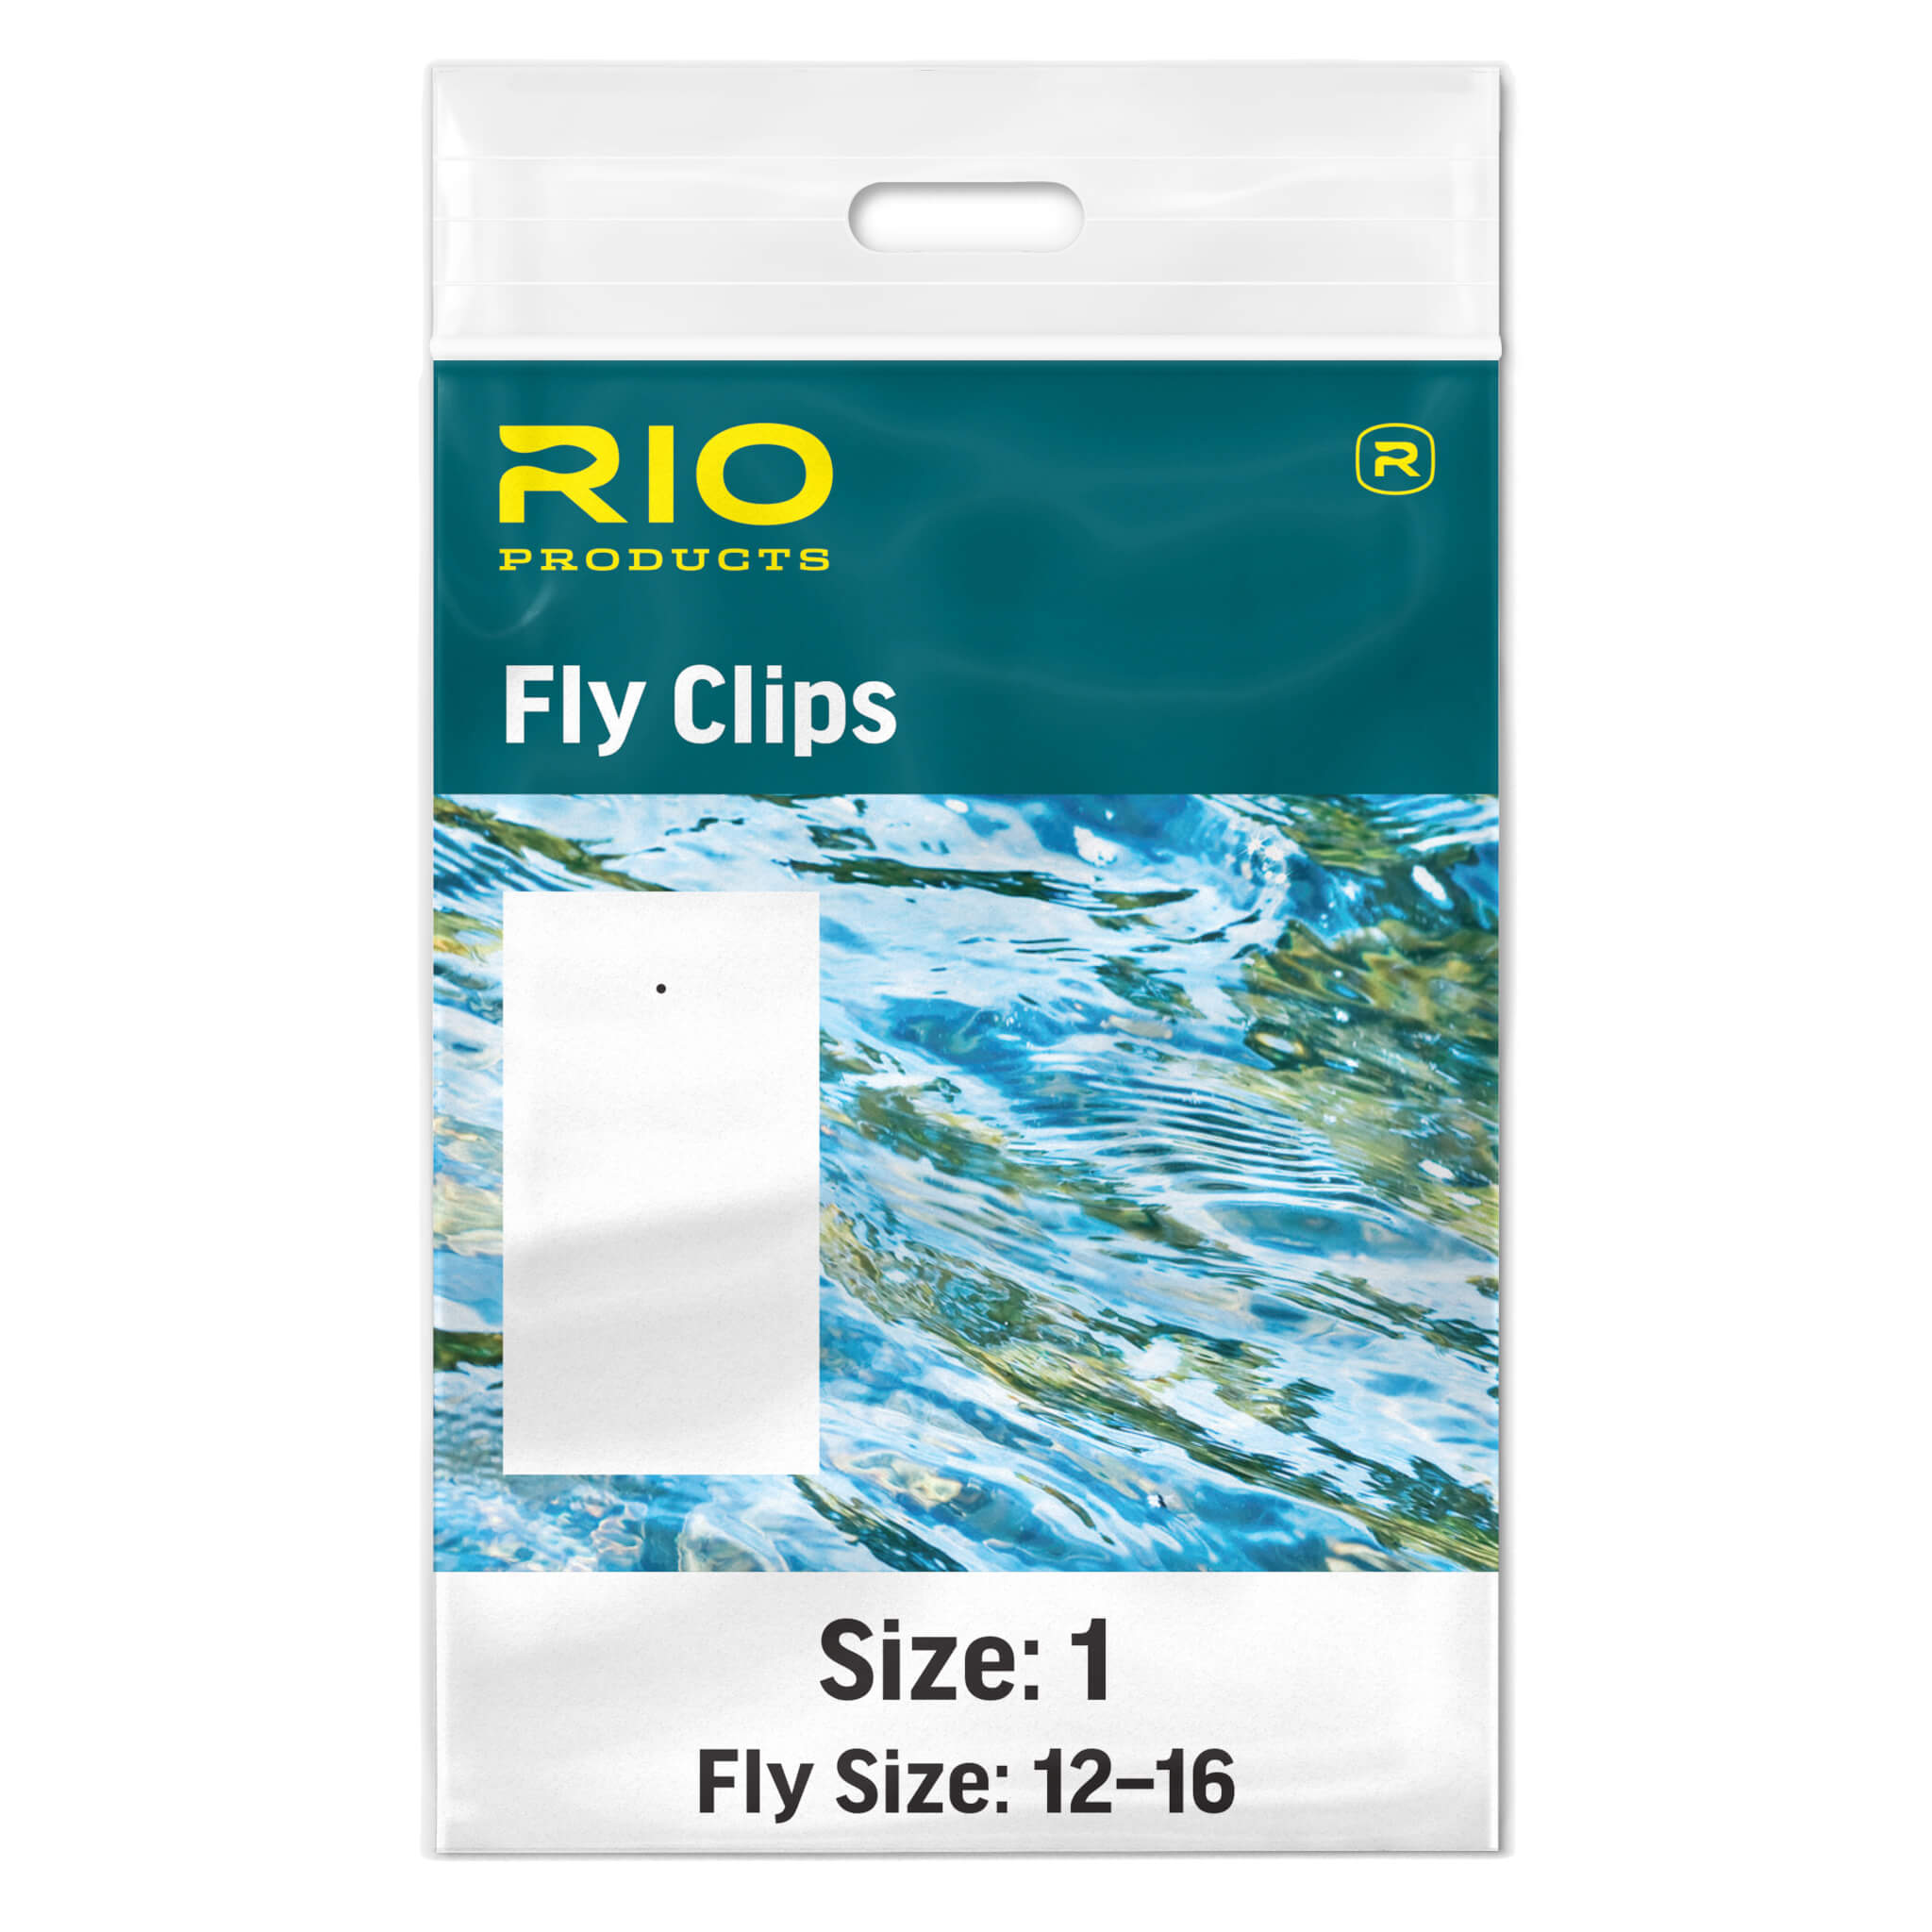 RIO Fly Clip – Guide Flyfishing, Fly Fishing Rods, Reels, Sage, Redington, RIO